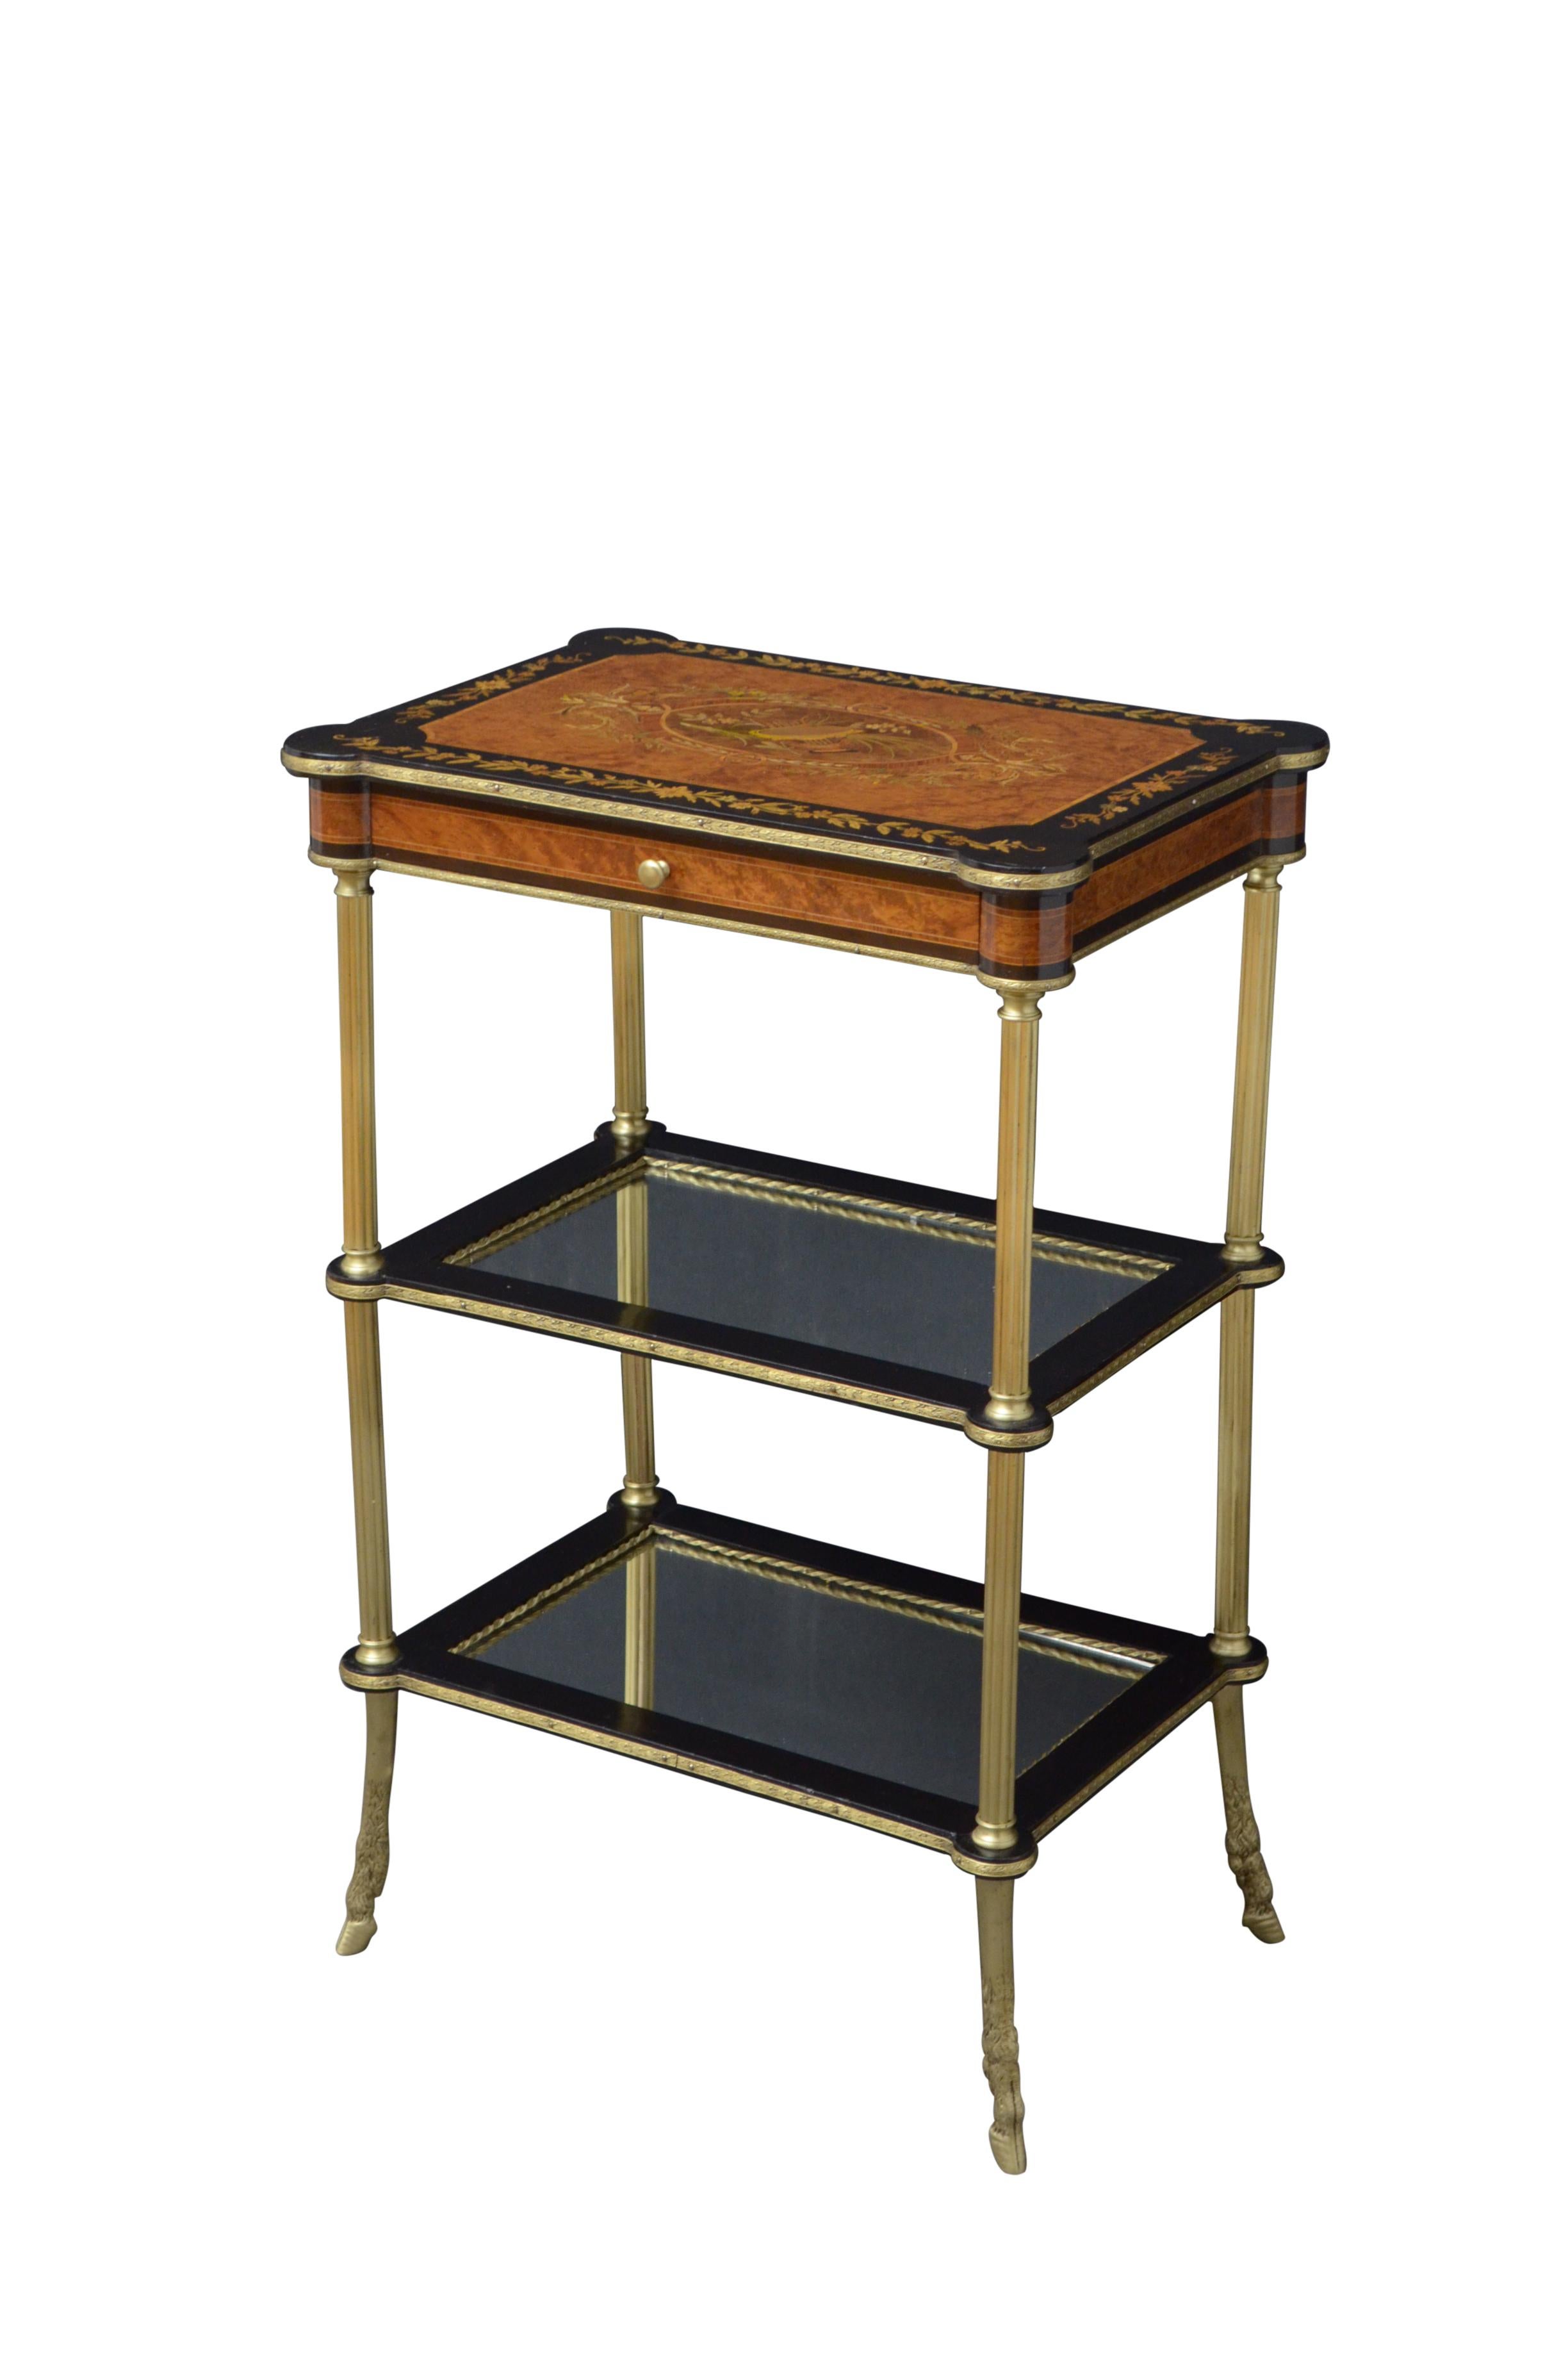 K0454 Attractive French lamp table, finely inlaid top with ebonised edge above mahogany lined drawer and 2 mirrored tiers, raised on brass reeded columns terminating in hoof feet. This antique table is in home ready condition. c1890
Measures: H